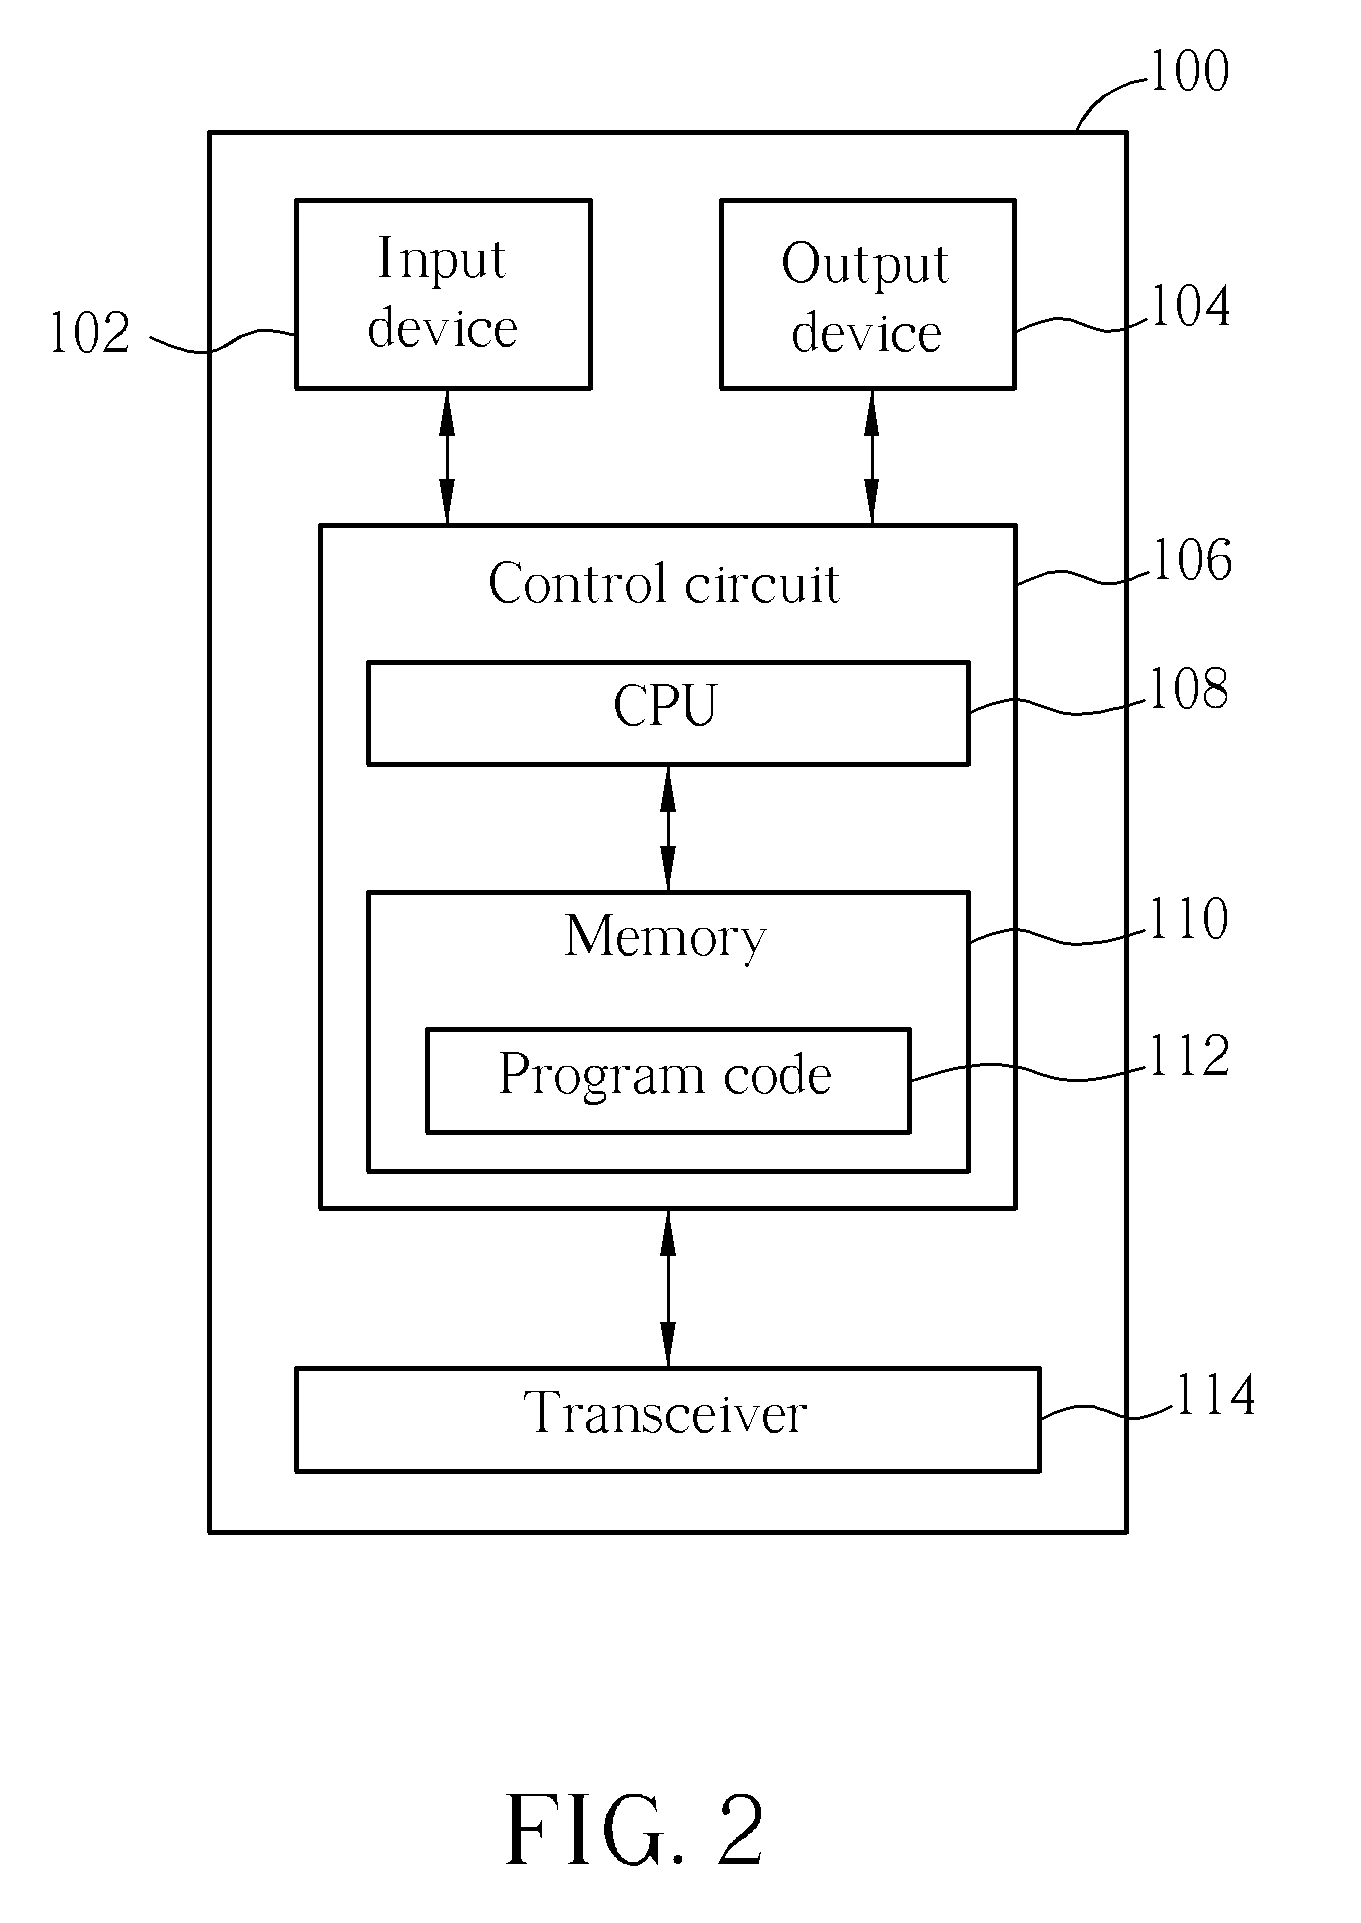 Method and Apparatus for Setting Headers in a Wireless Communications System